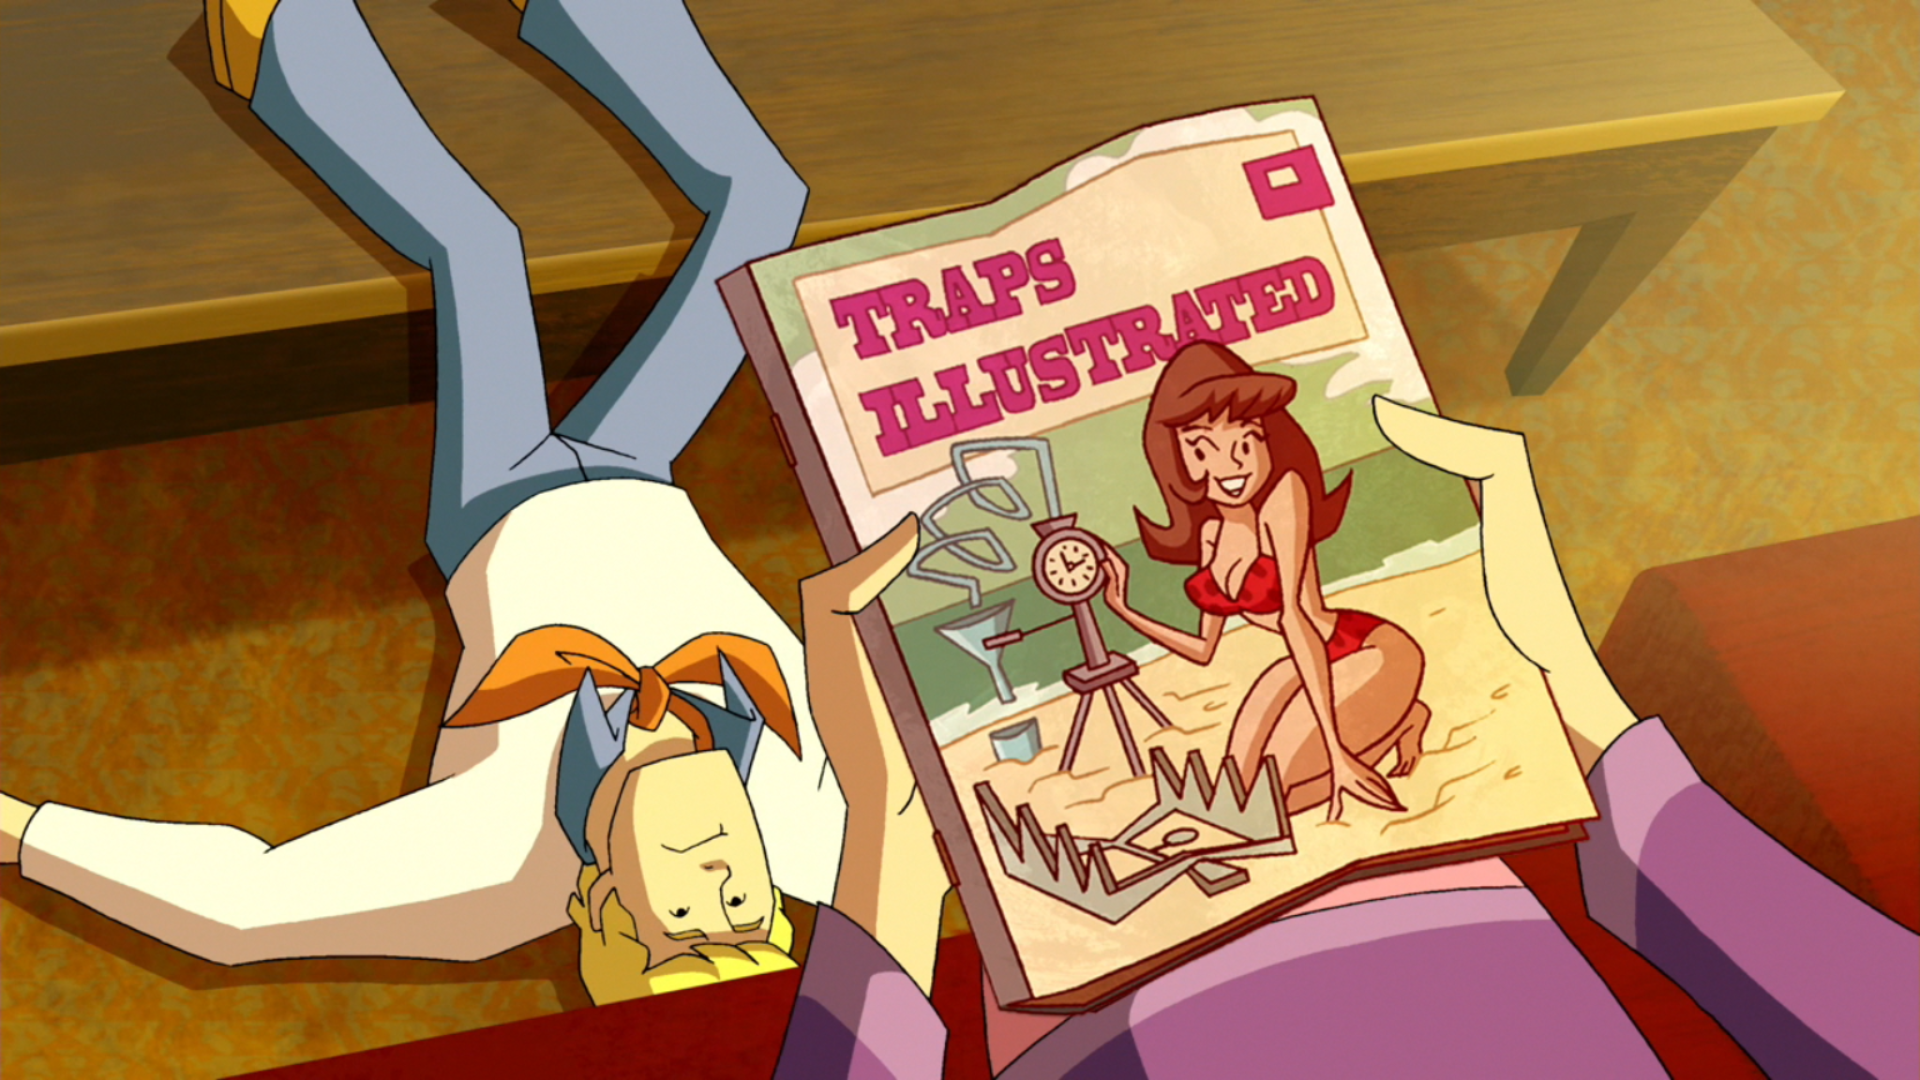 I sit thinking what gender the creature is on the cover of the magazine - Ladder, Scooby Doo, Its a trap!